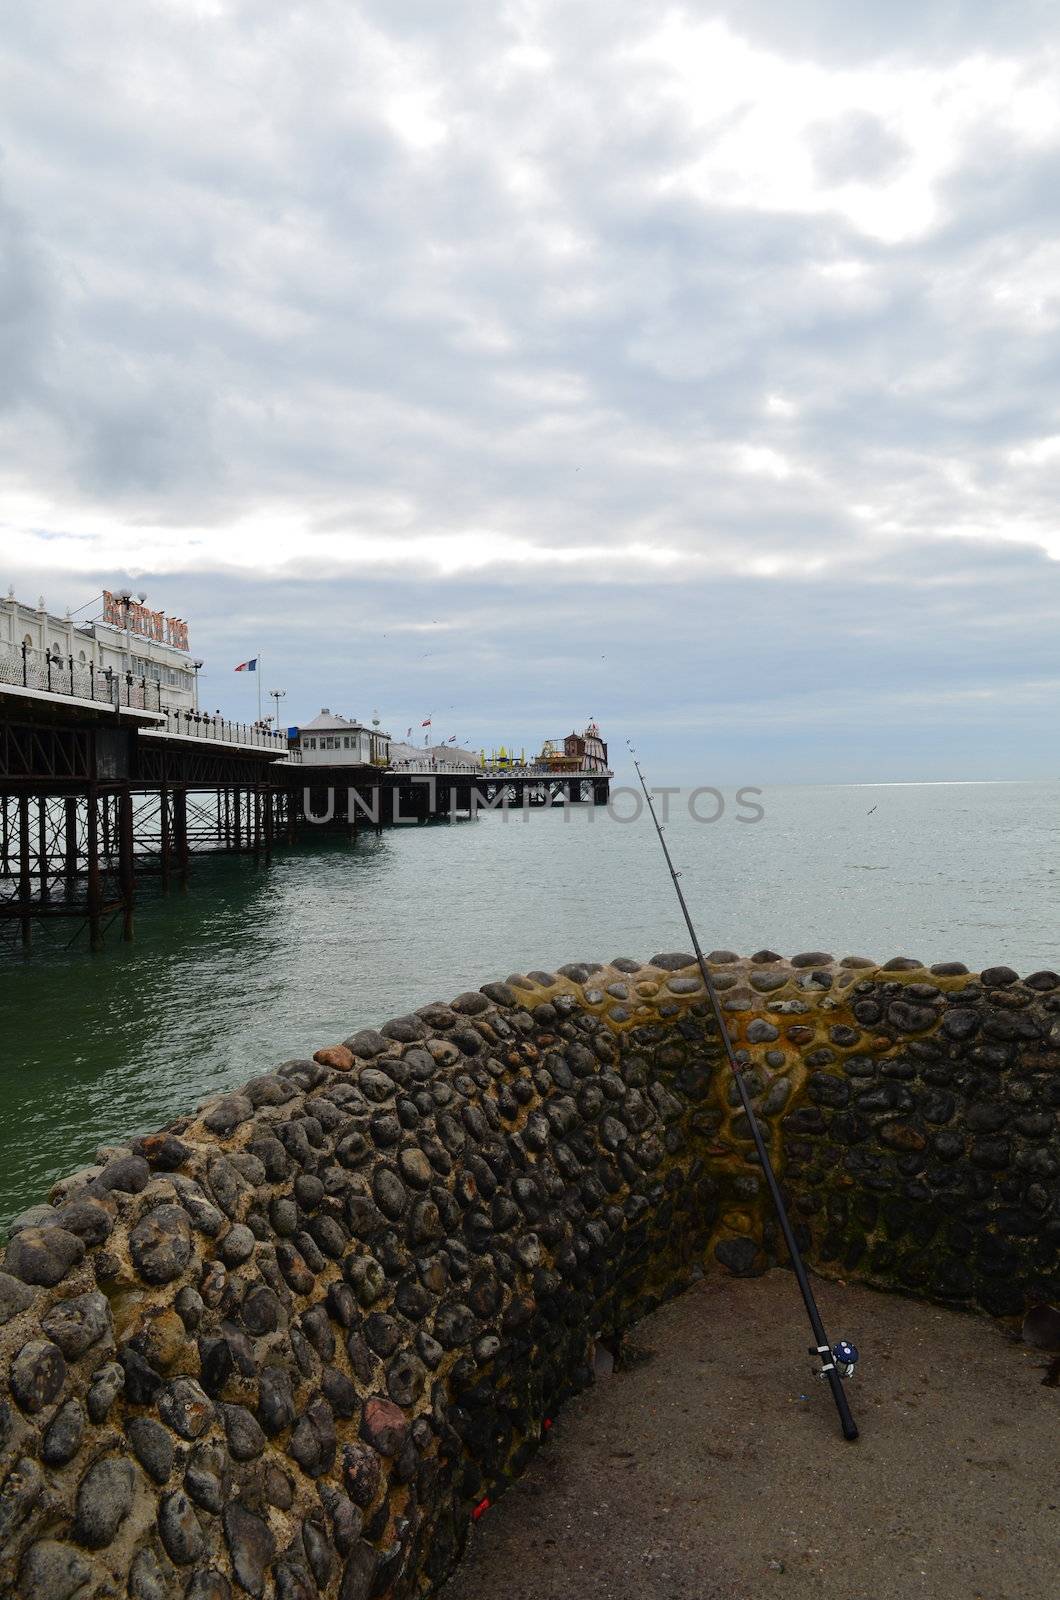 Signal fishing rod resting against a harbour wall with Brighton pier in the foreground.